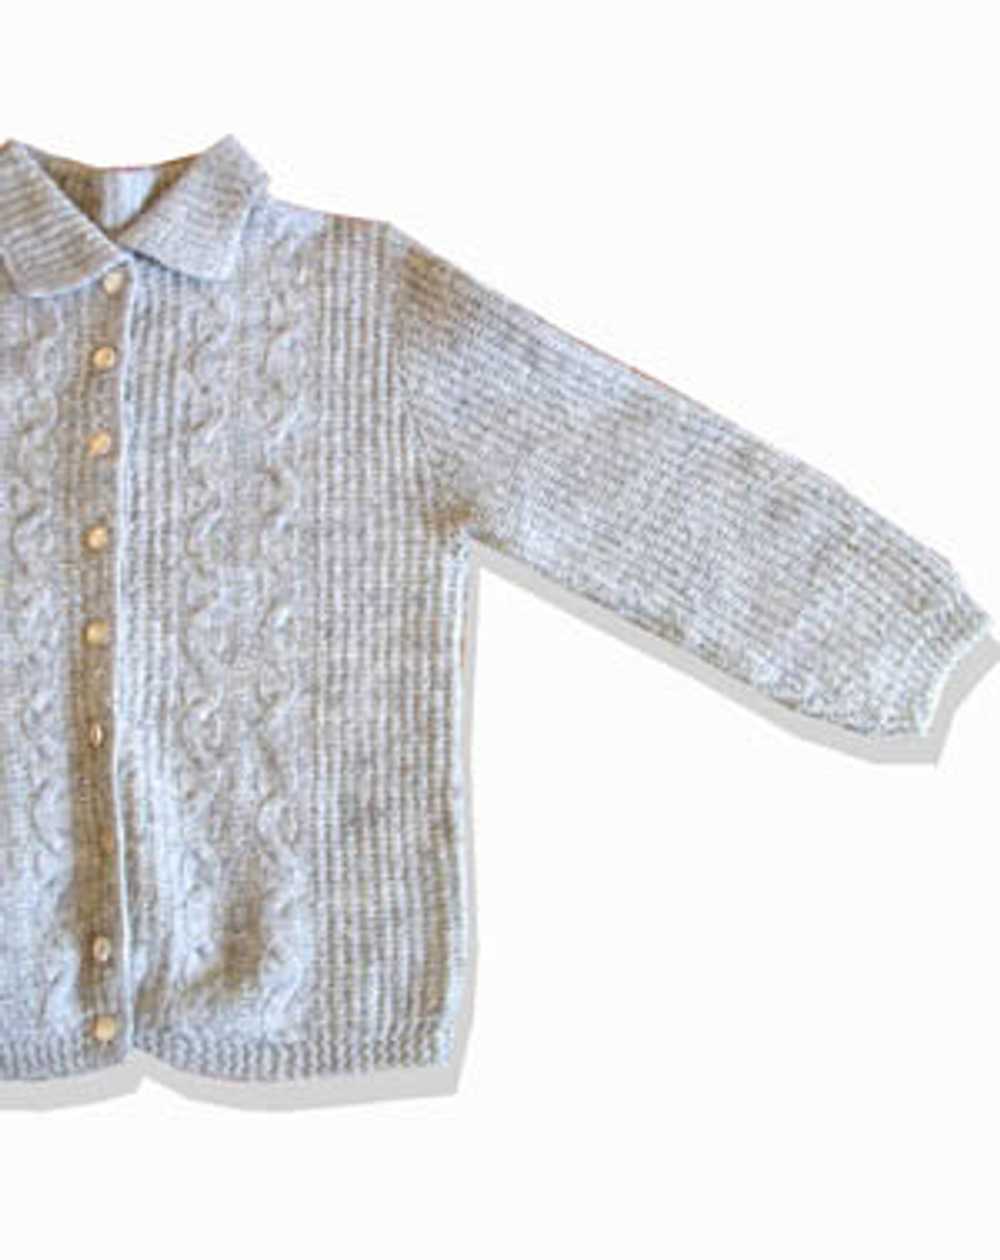 May Claire heathered cardigan - image 1